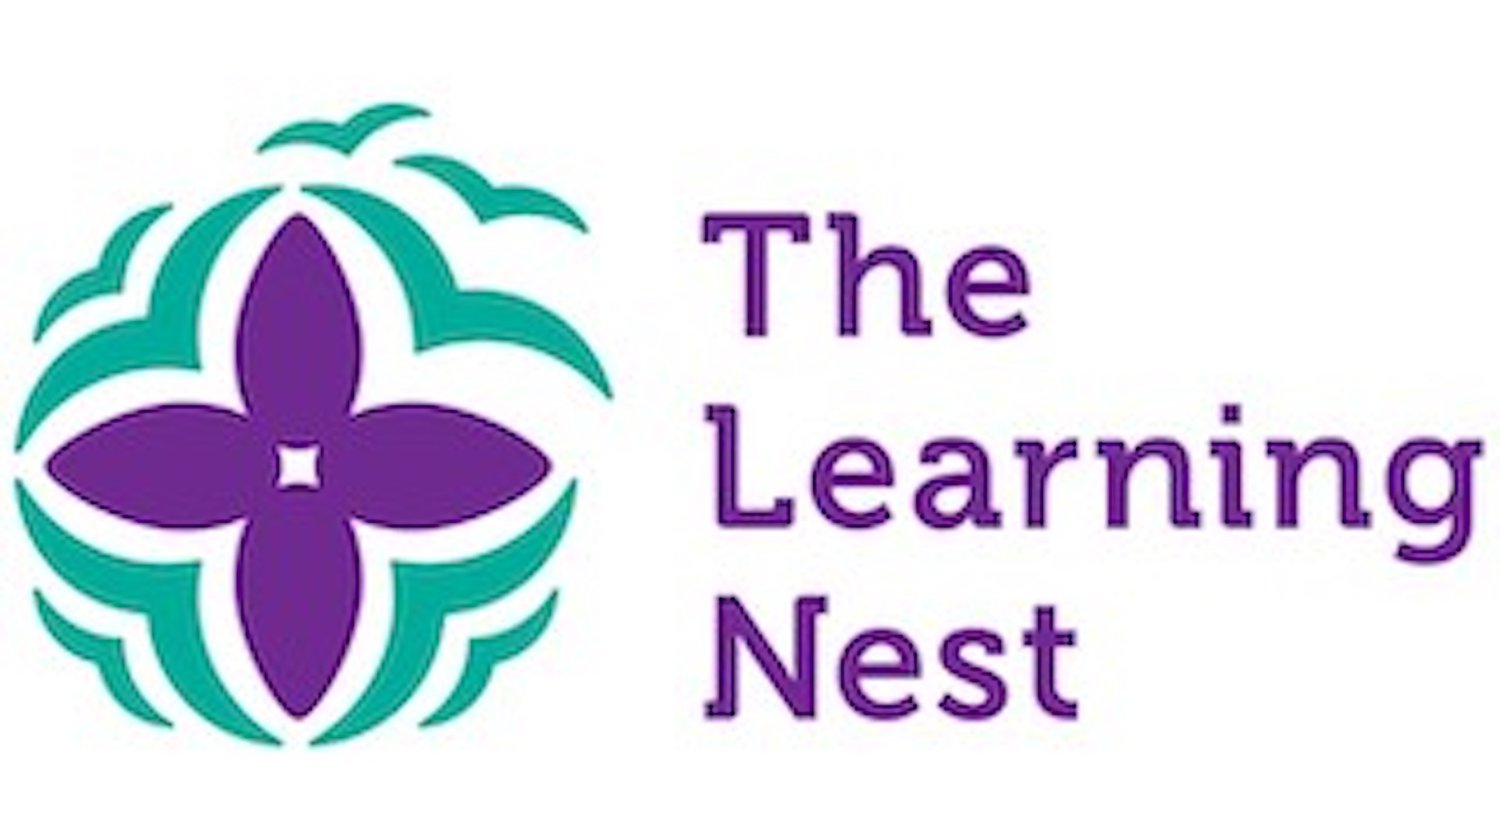 The Learning Nest SG